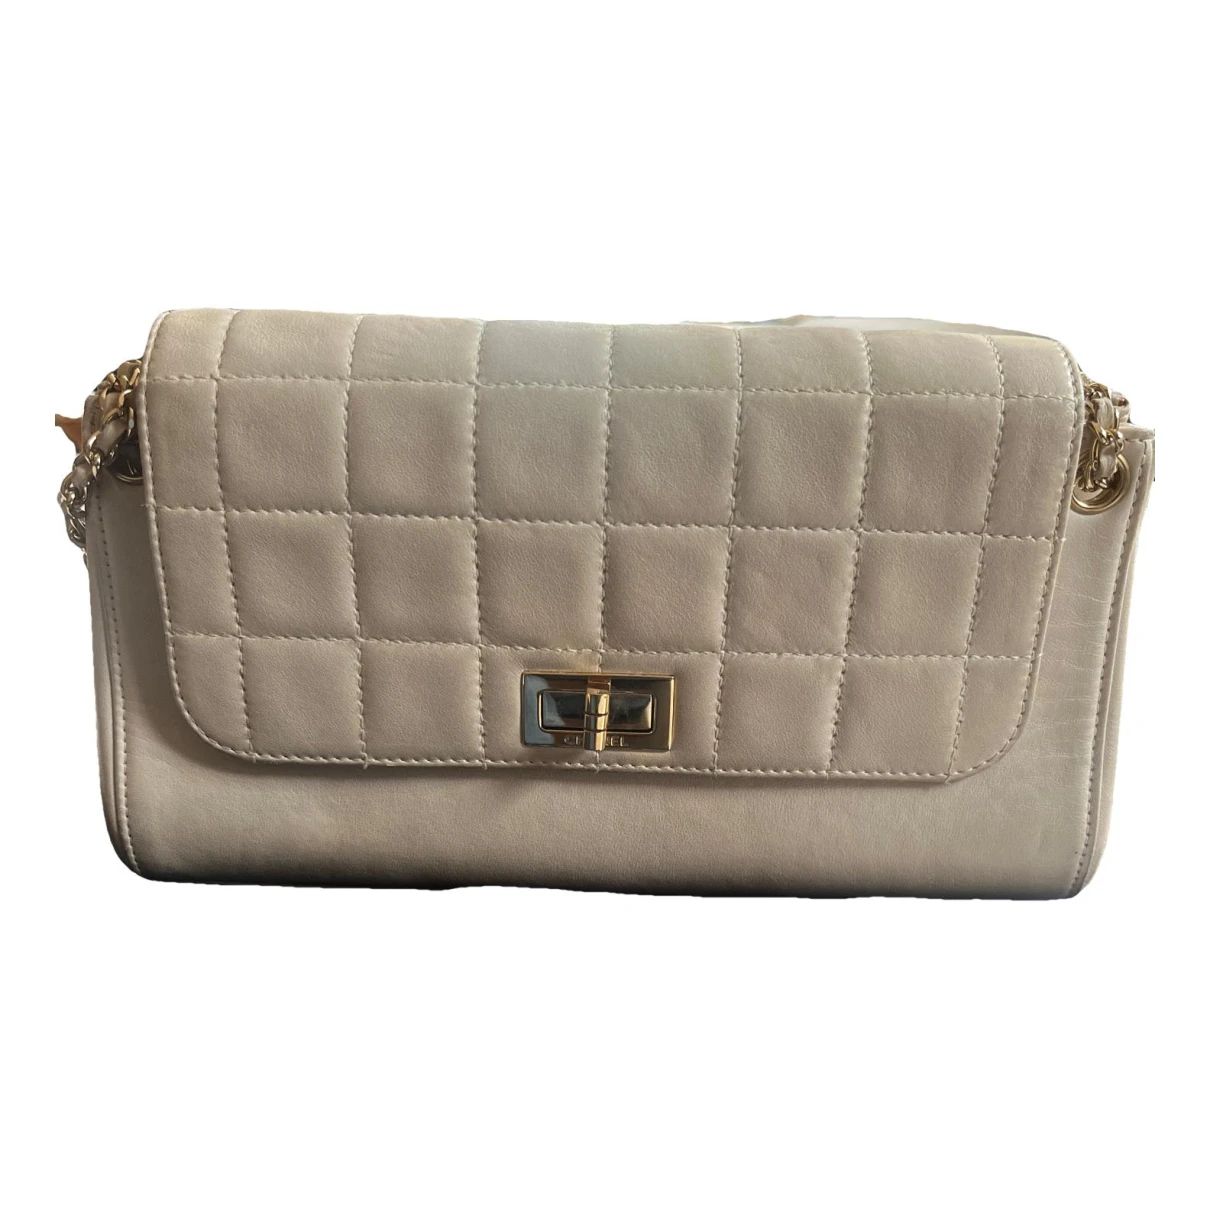 Pre-owned Chanel 2.55 Leather Crossbody Bag In Beige